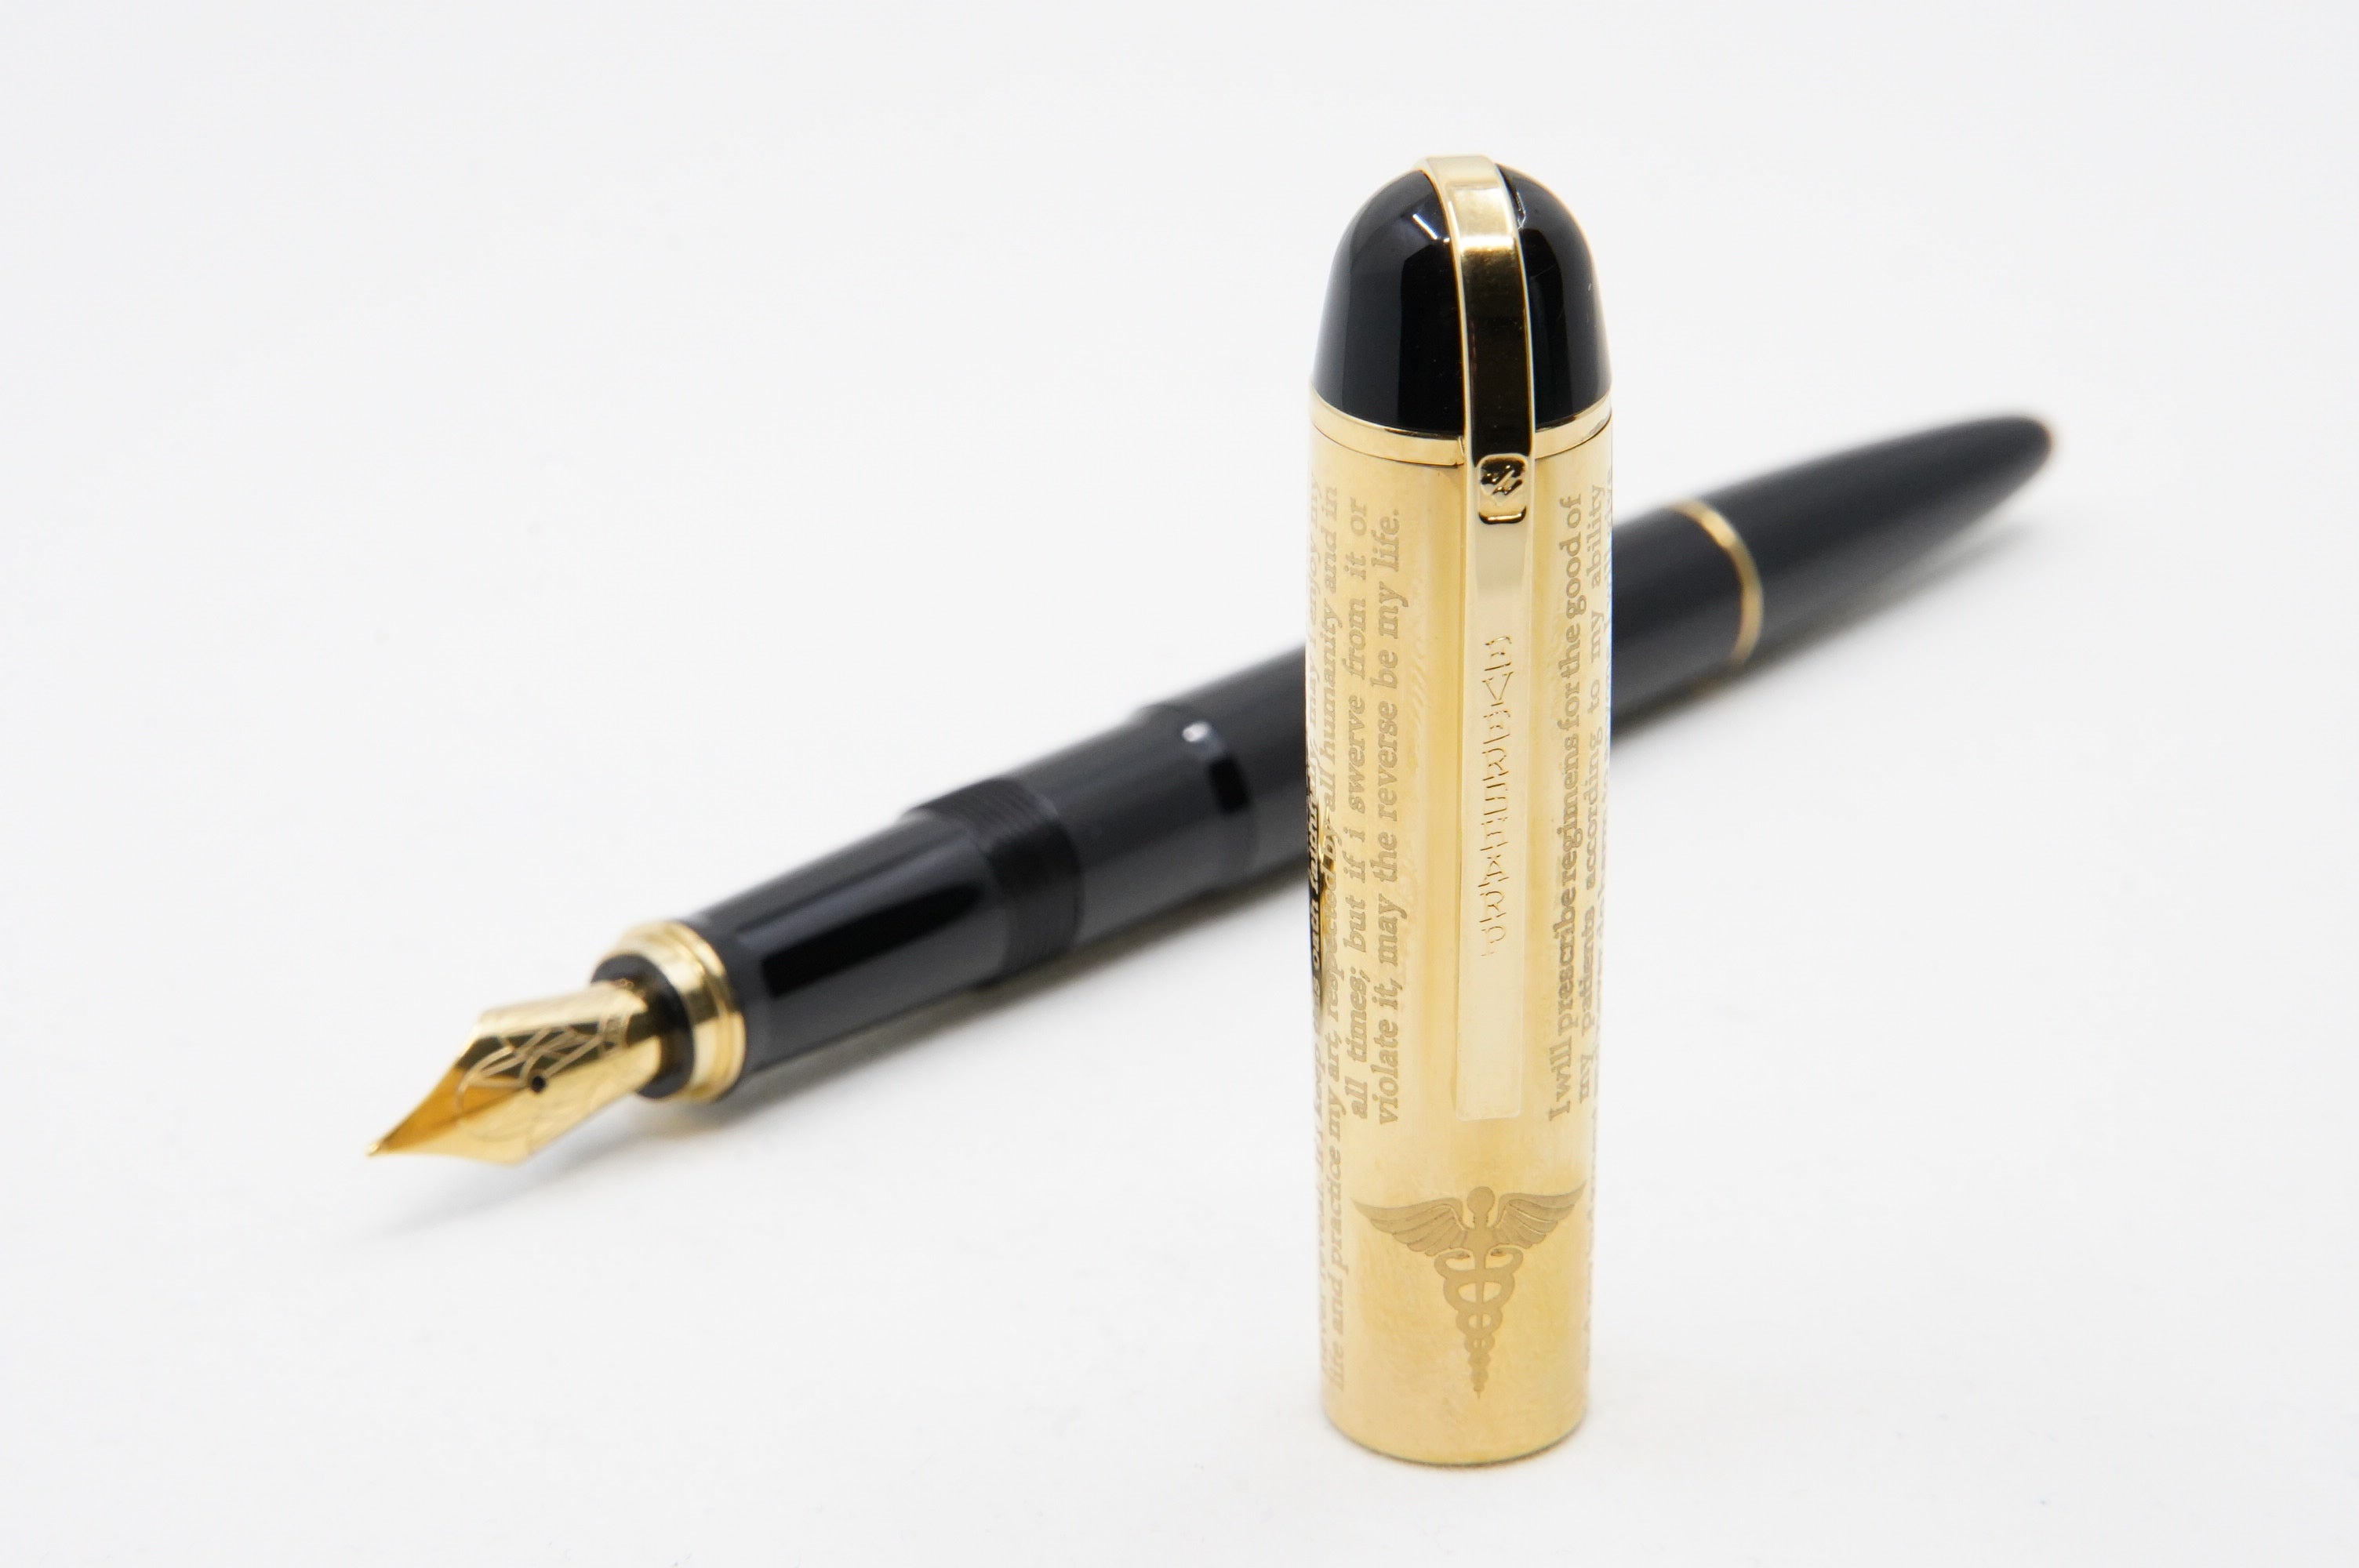 Wahl Eversharp Skyline FP Tribute To Doctors Black - The iconic SKYLINE created by Henry Dreyfus in 1939